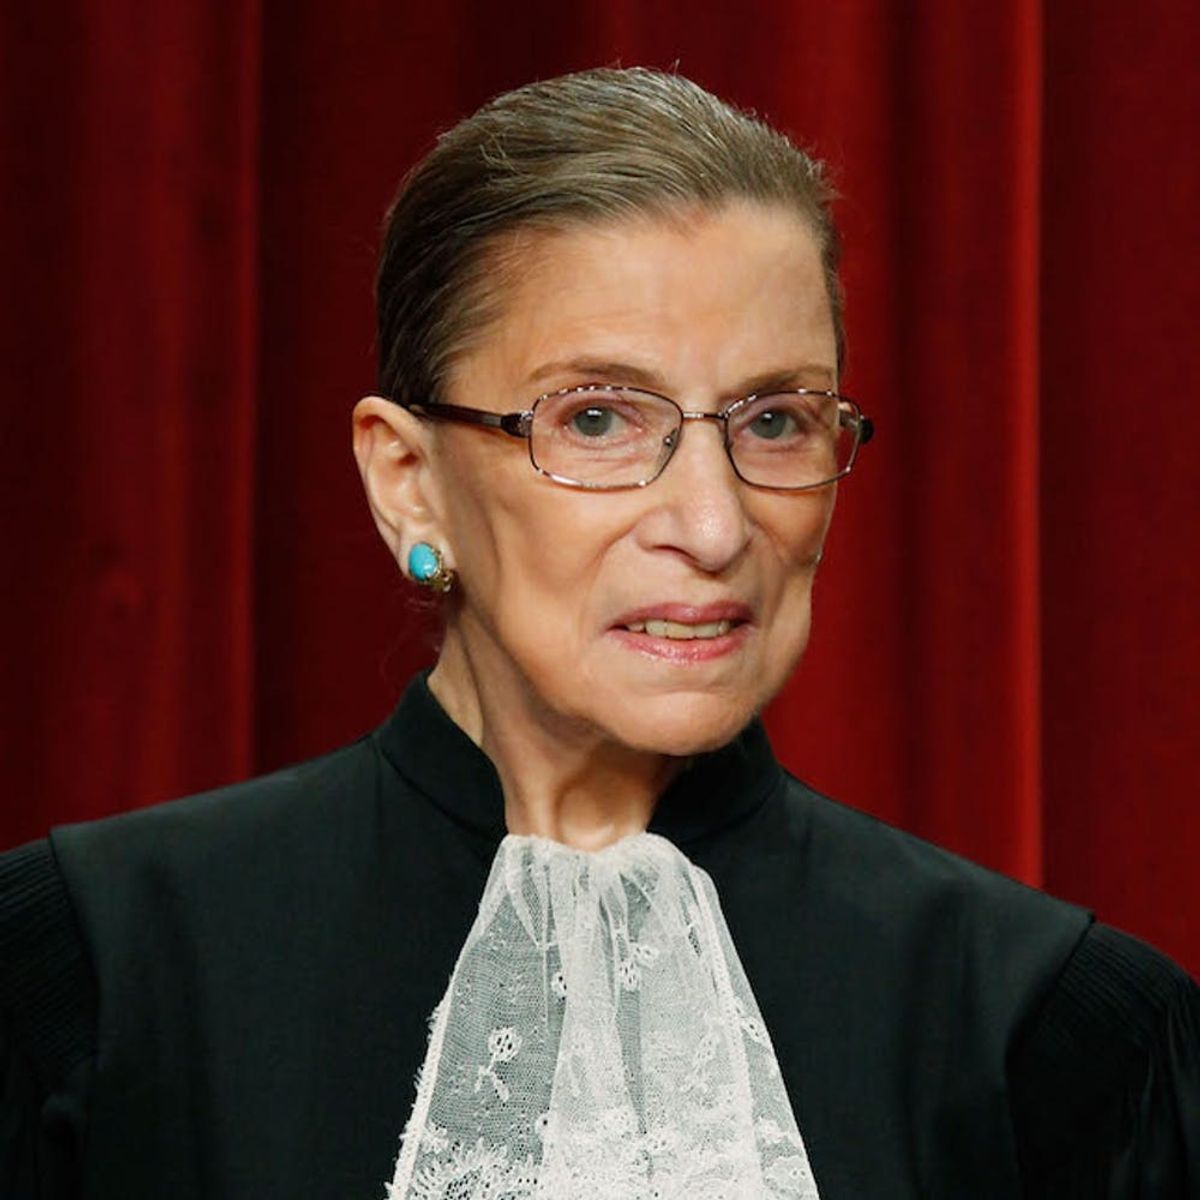 Ruth Bader Ginsburg’s Intense Workout Plan Could Destroy You